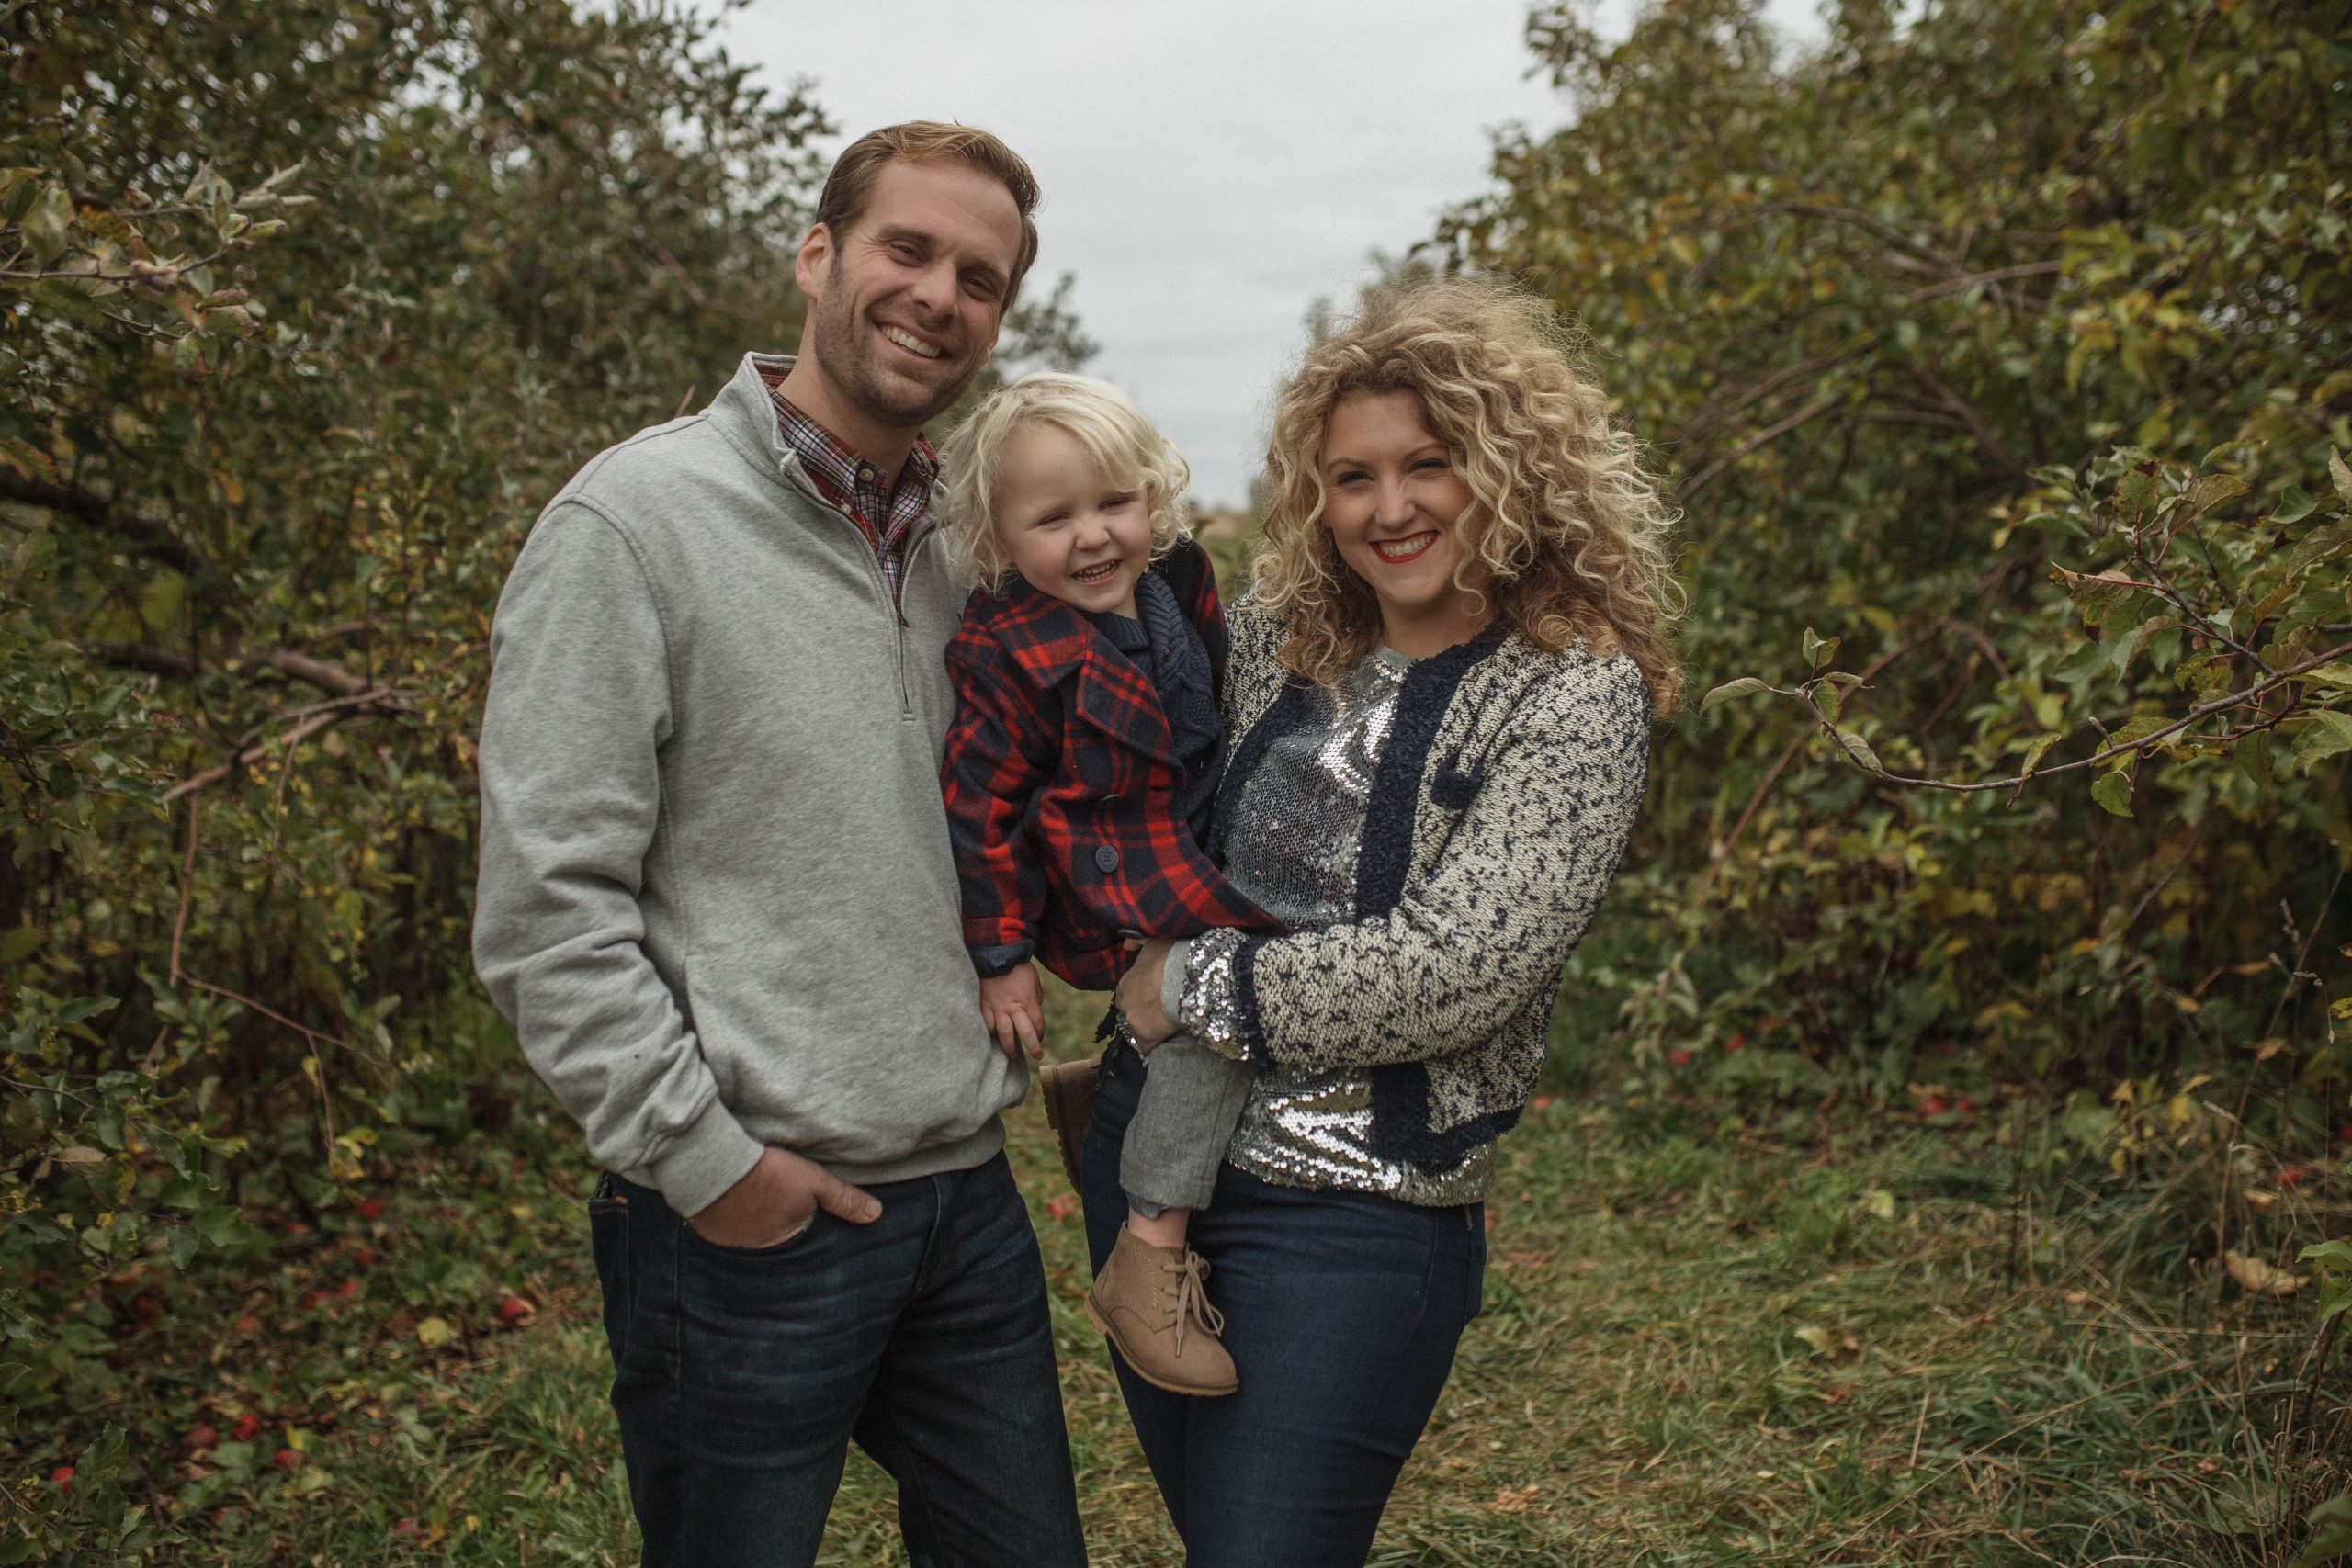 Family Photos in the apple orchard in michigan